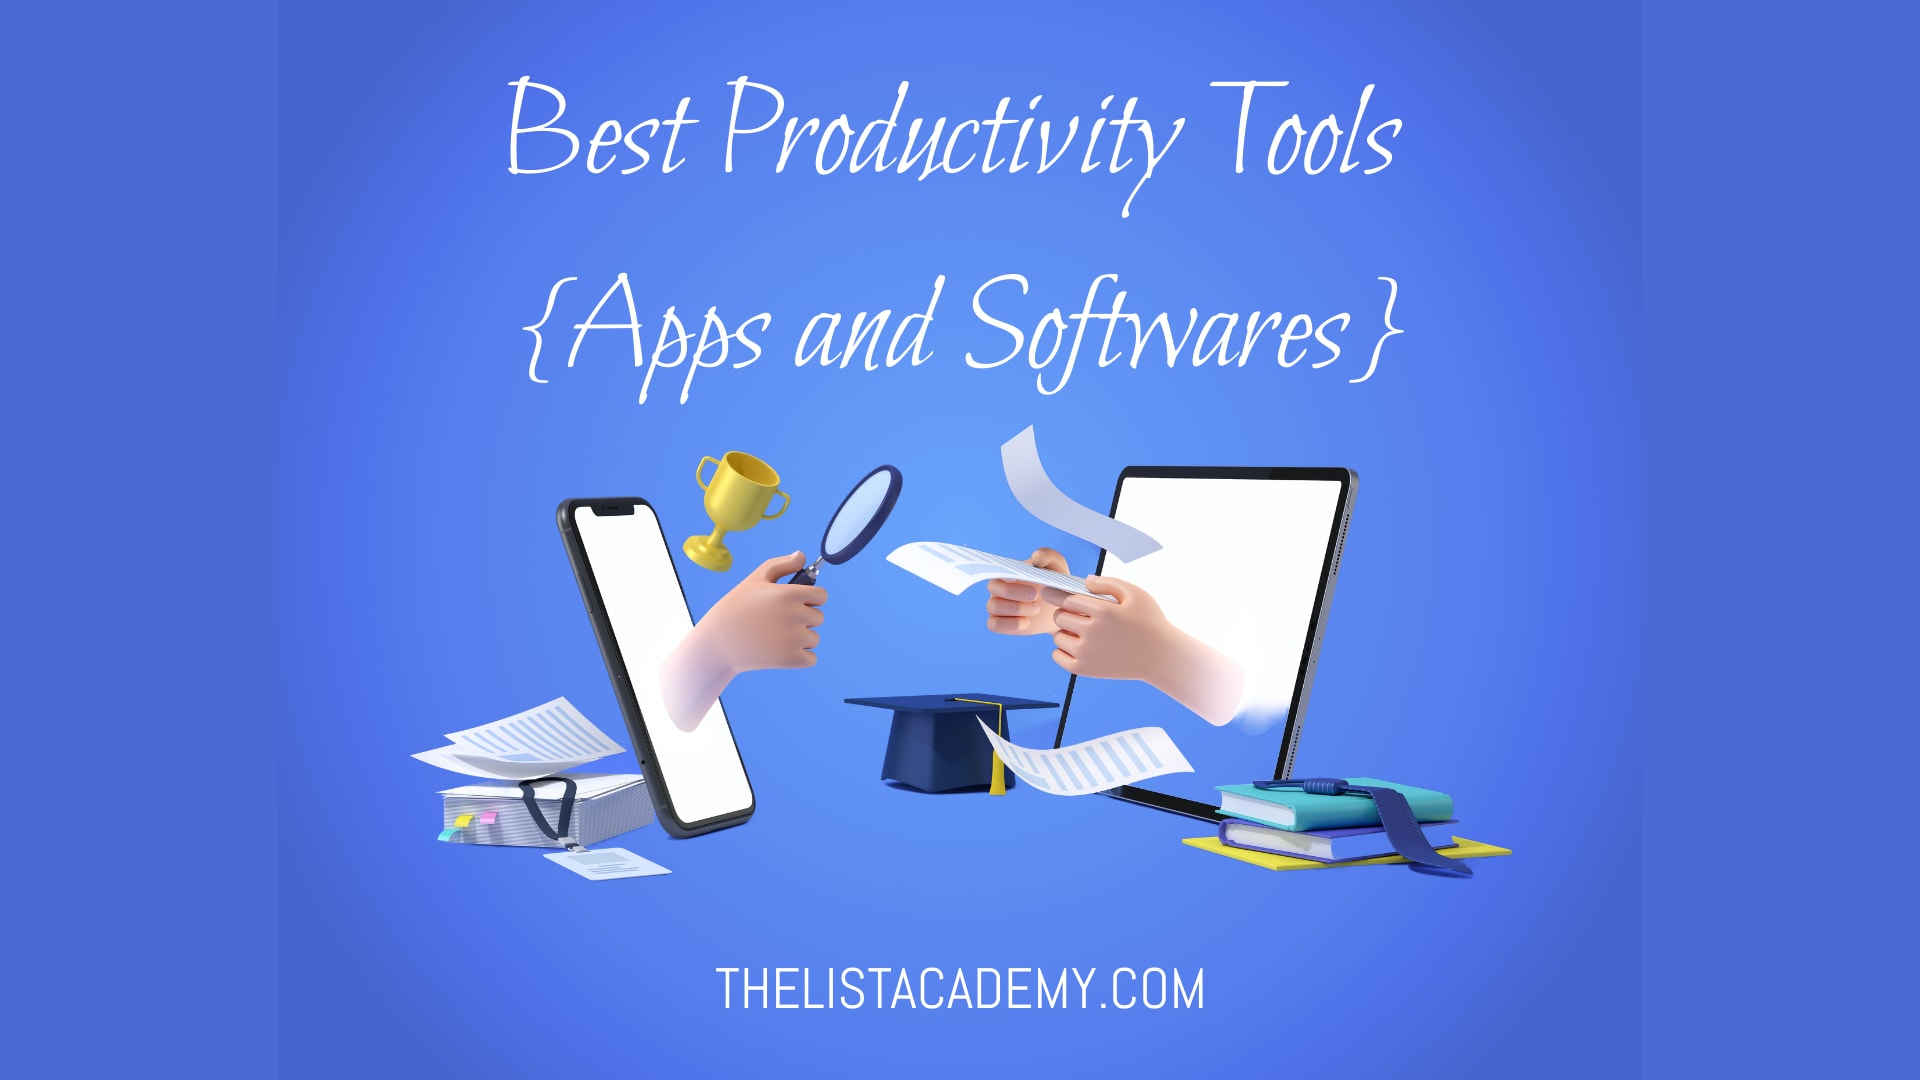 Cover Image For List : 95 Productivity Tools - List Of Best Productivity Apps And Softwares